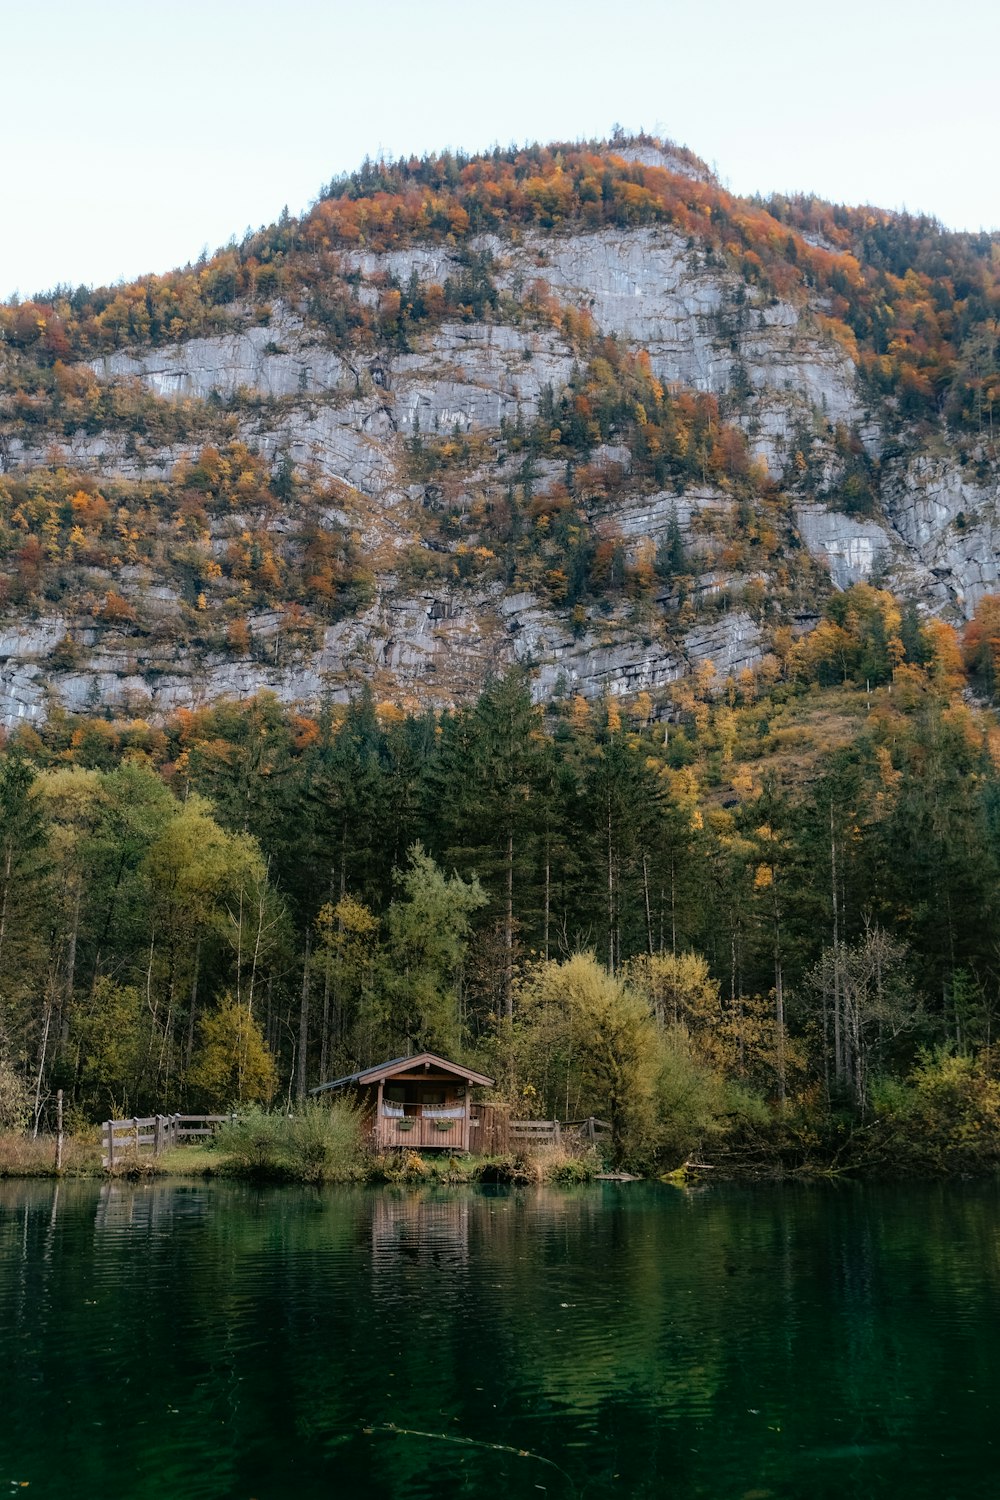 a small cabin on a small island in the middle of a lake